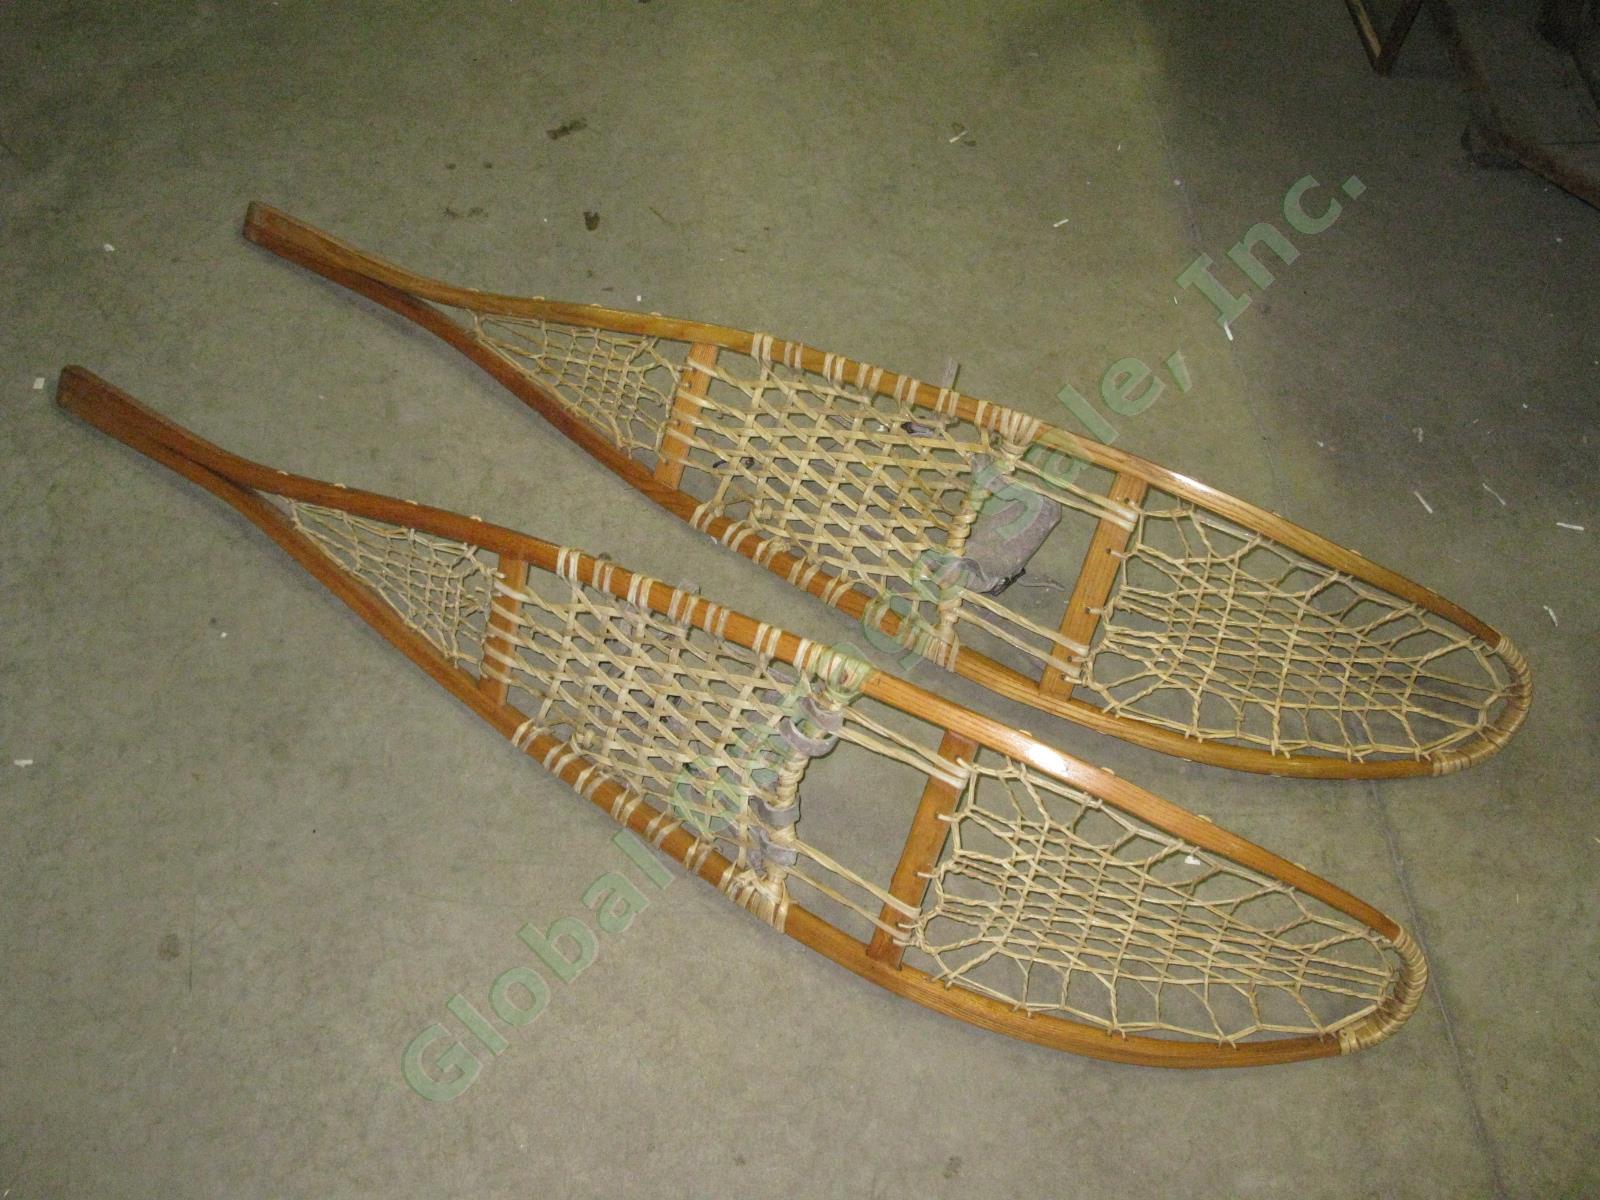 Vtg Wood Wooden Vermont Made Tubbs Snowshoes 10x56-S-0 w/Bindings Exc Cond NR! 6